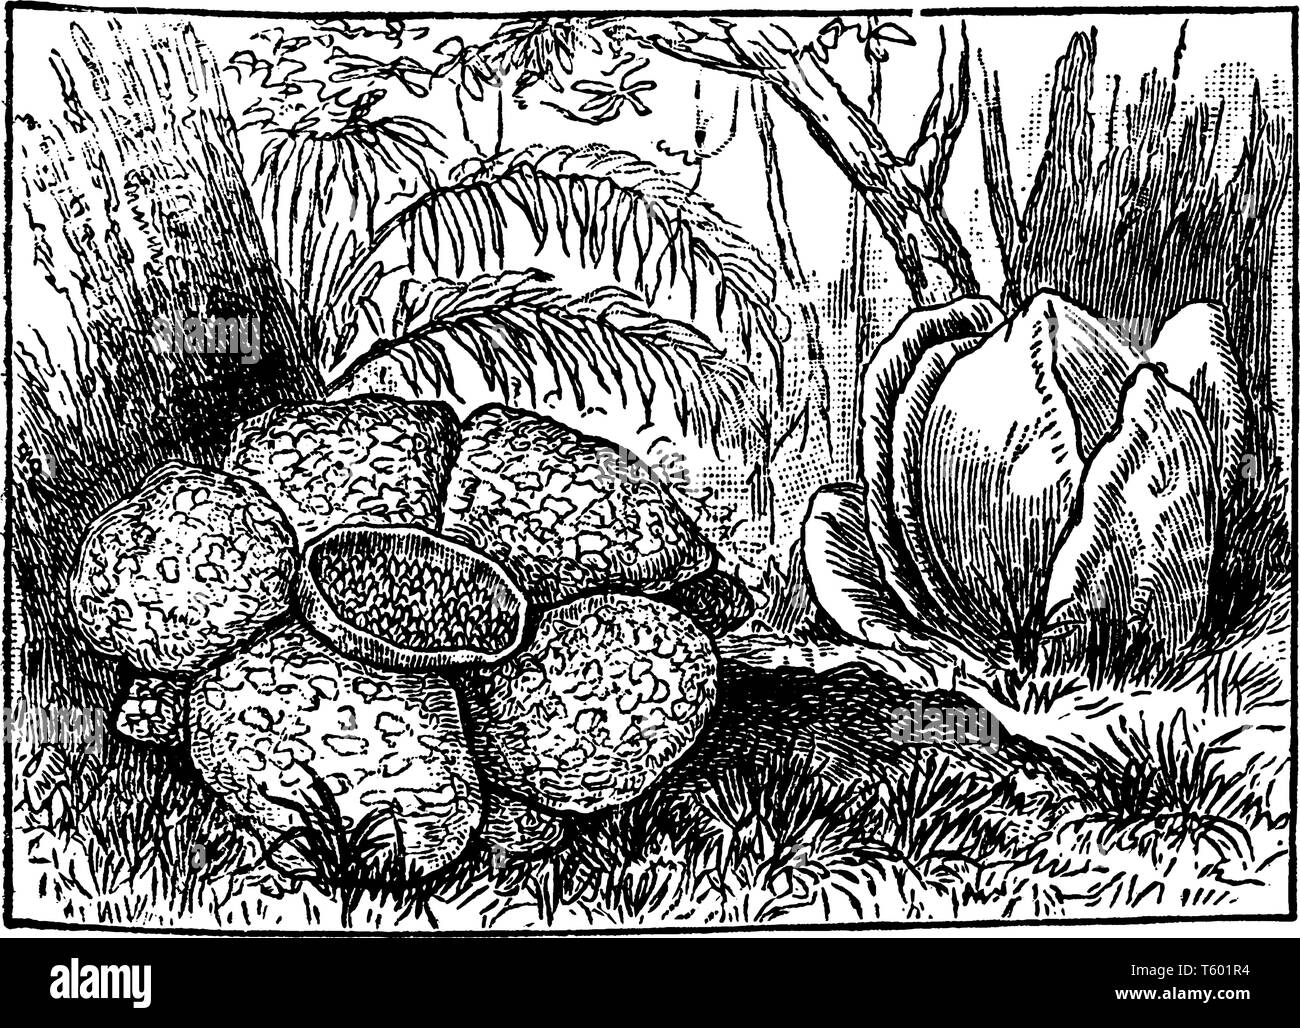 A picture is showing Rafflesia Flower. Rafflesia is a genus of parasitic flowering plants. This is gigantic flower, vintage line drawing or engraving  Stock Vector